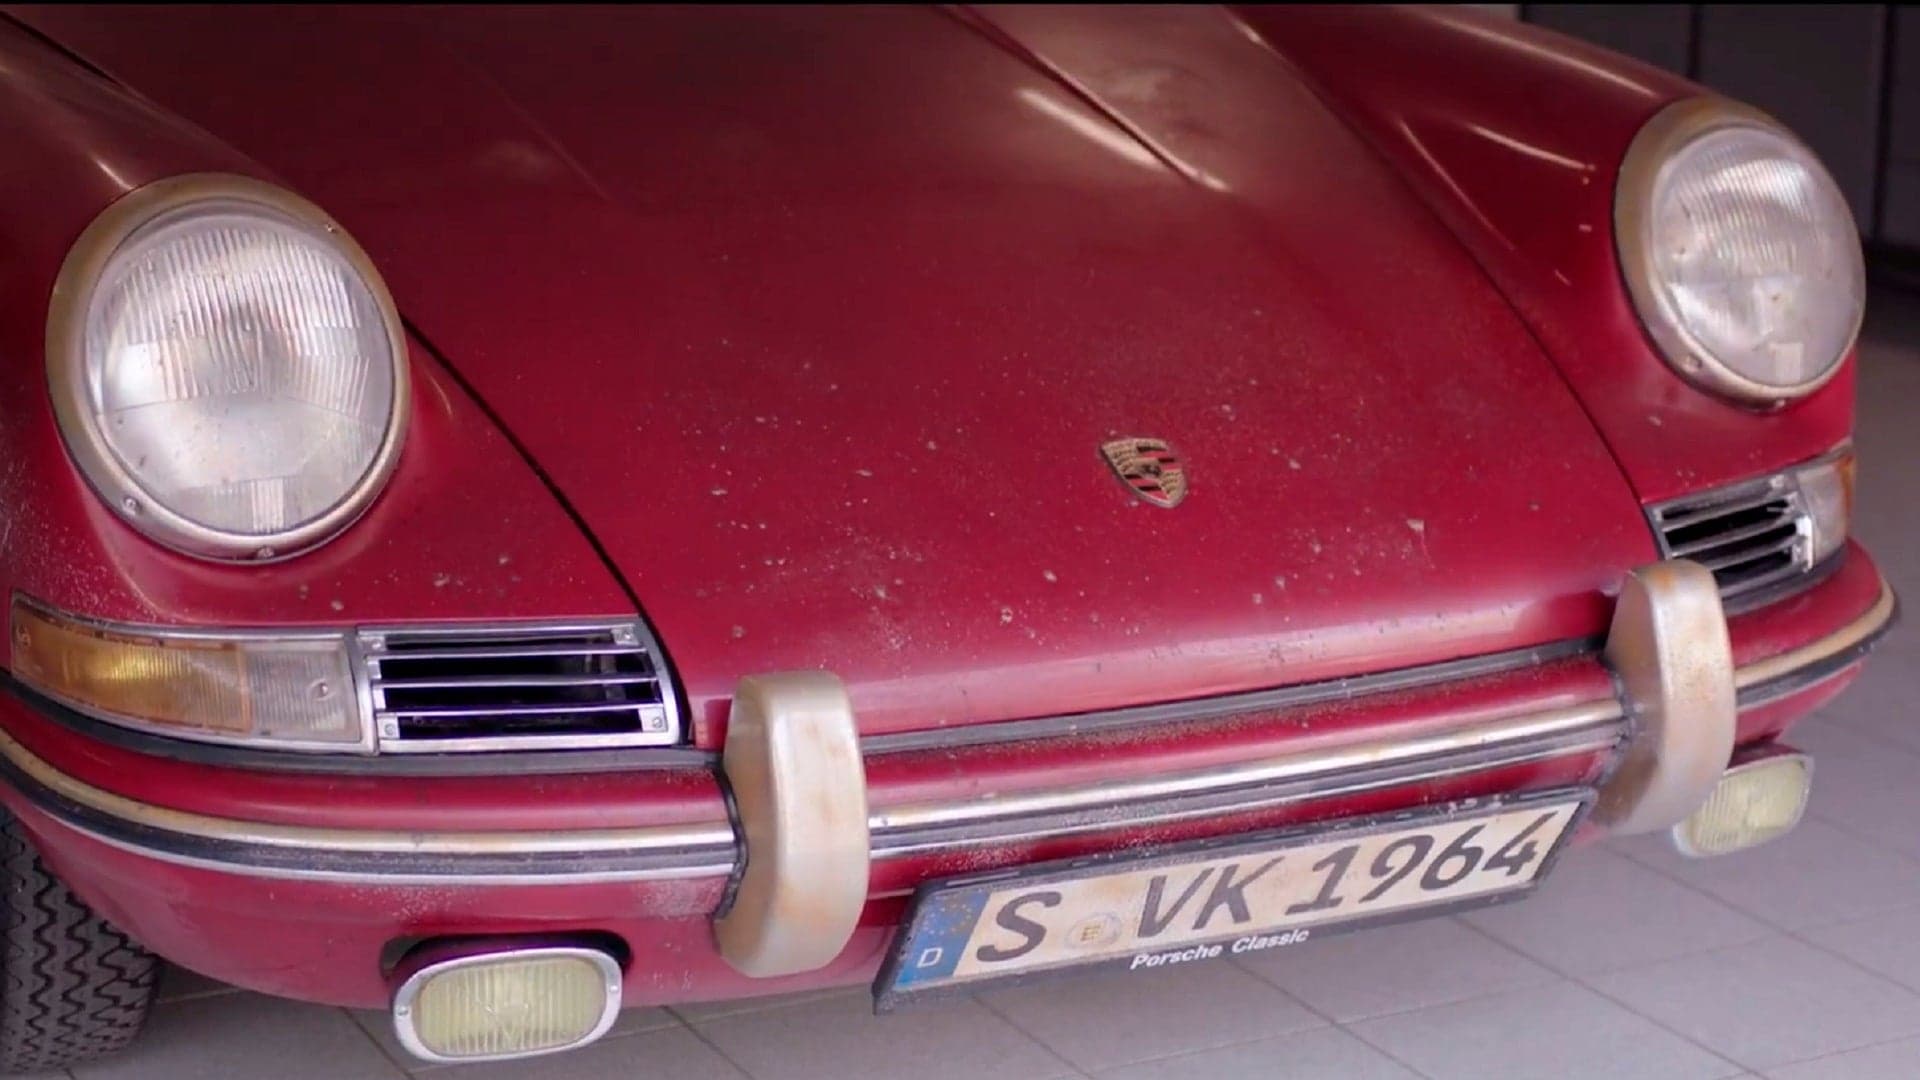 Can Cleaning Your Old Porsche Bring Back The Memories Of The Good Old Days?